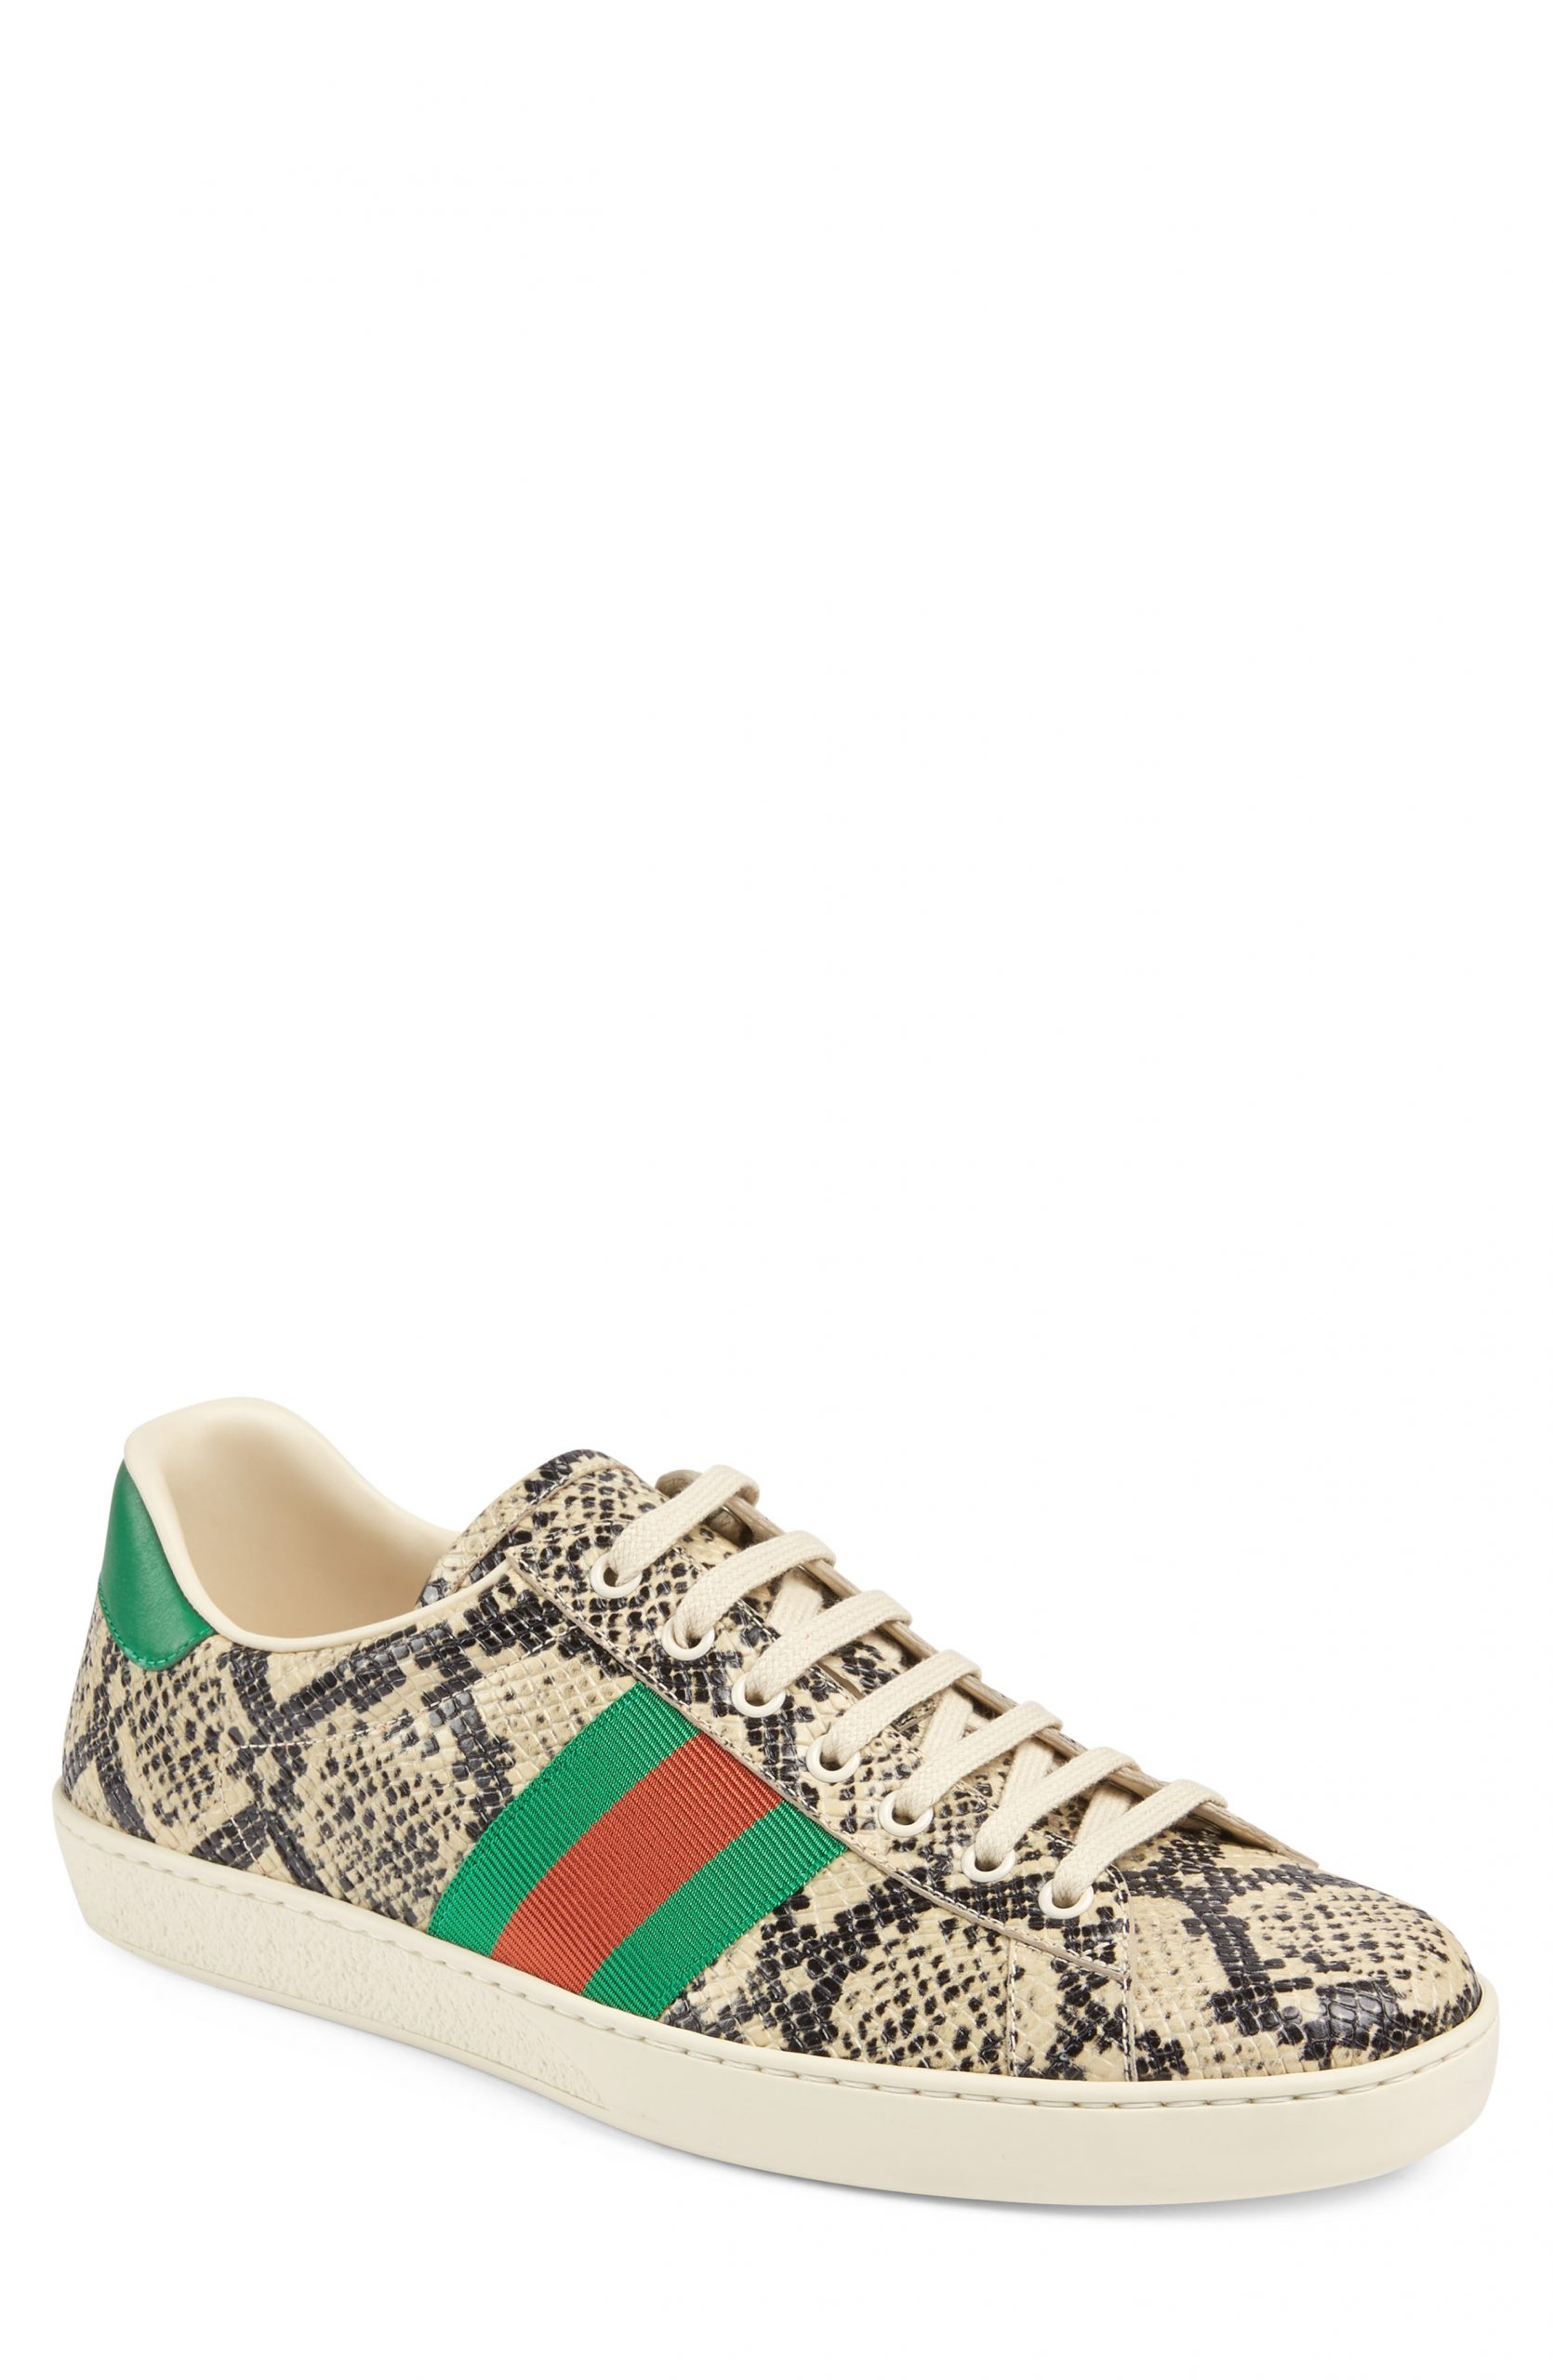 gucci sneakers size 12